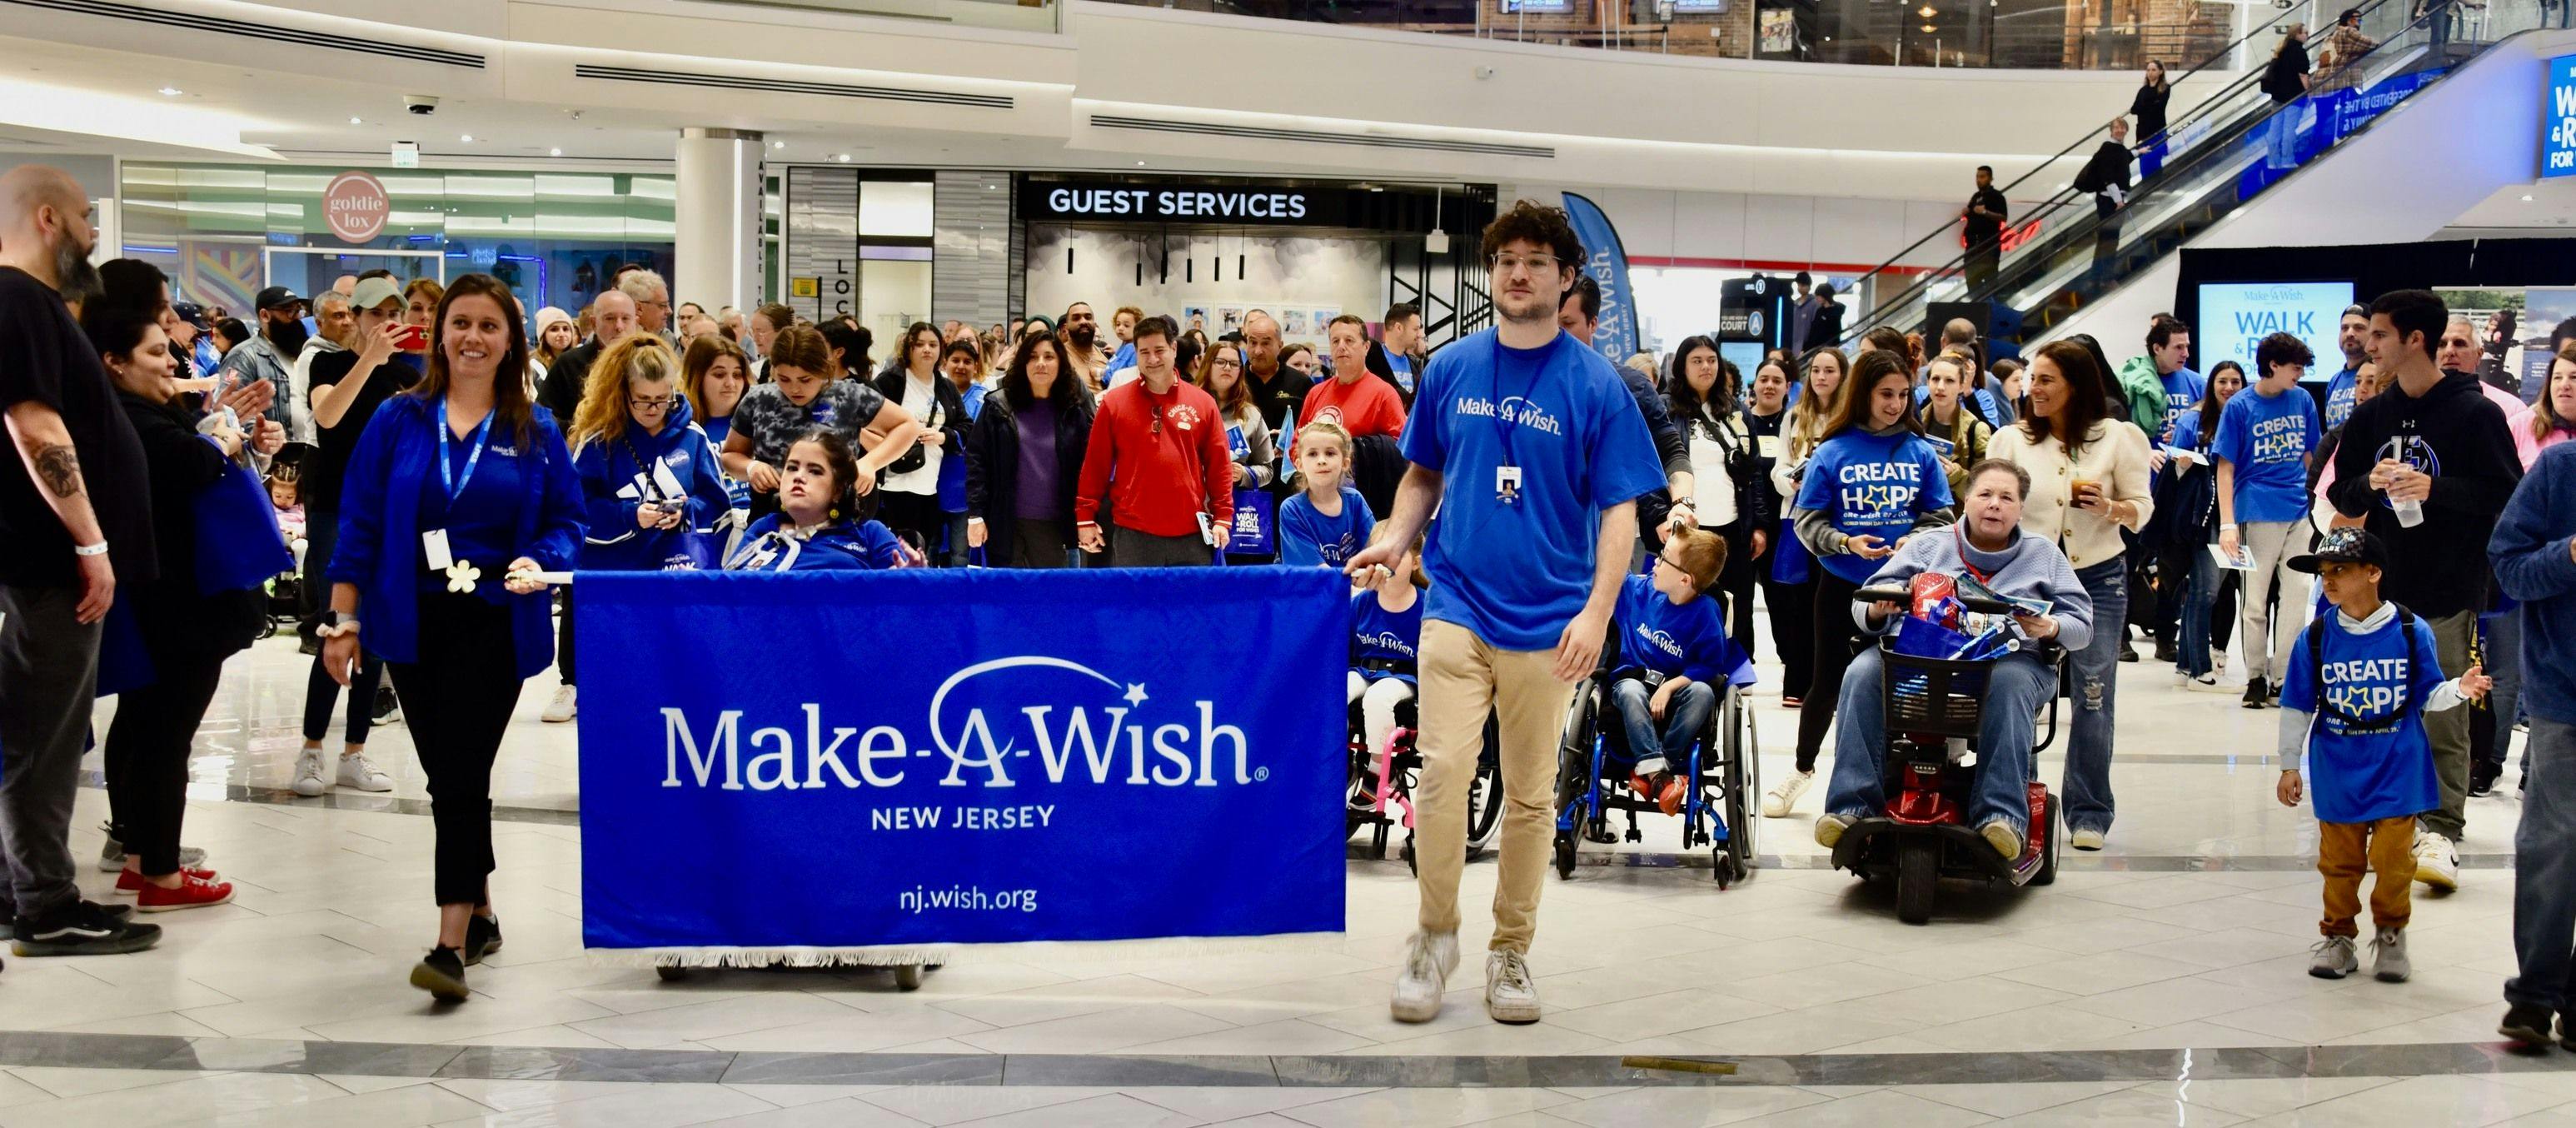 Attendees at World Wish Day in New Jersey. Photo courtesy of Make-A-Wish New Jersey.